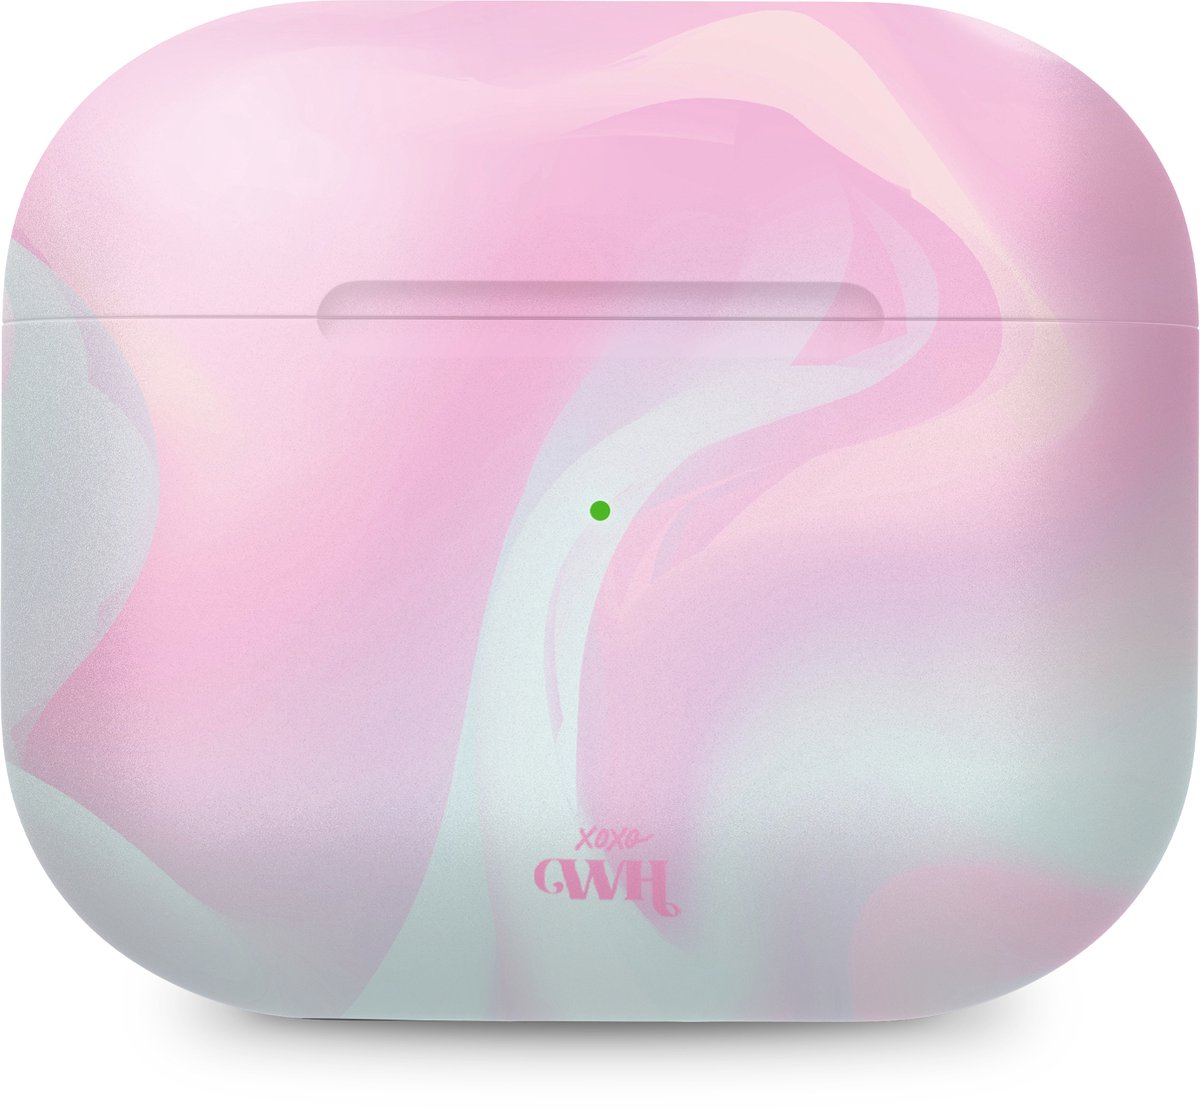 Airpods case Marble Sugar Rush - Airpods hoesje geschikt voor Airpods Pro 1/2 - Marmer - Roze - Airpods hoes - Airpods Pro 1/2 hoesje - Koptelefoon case - Hoesje